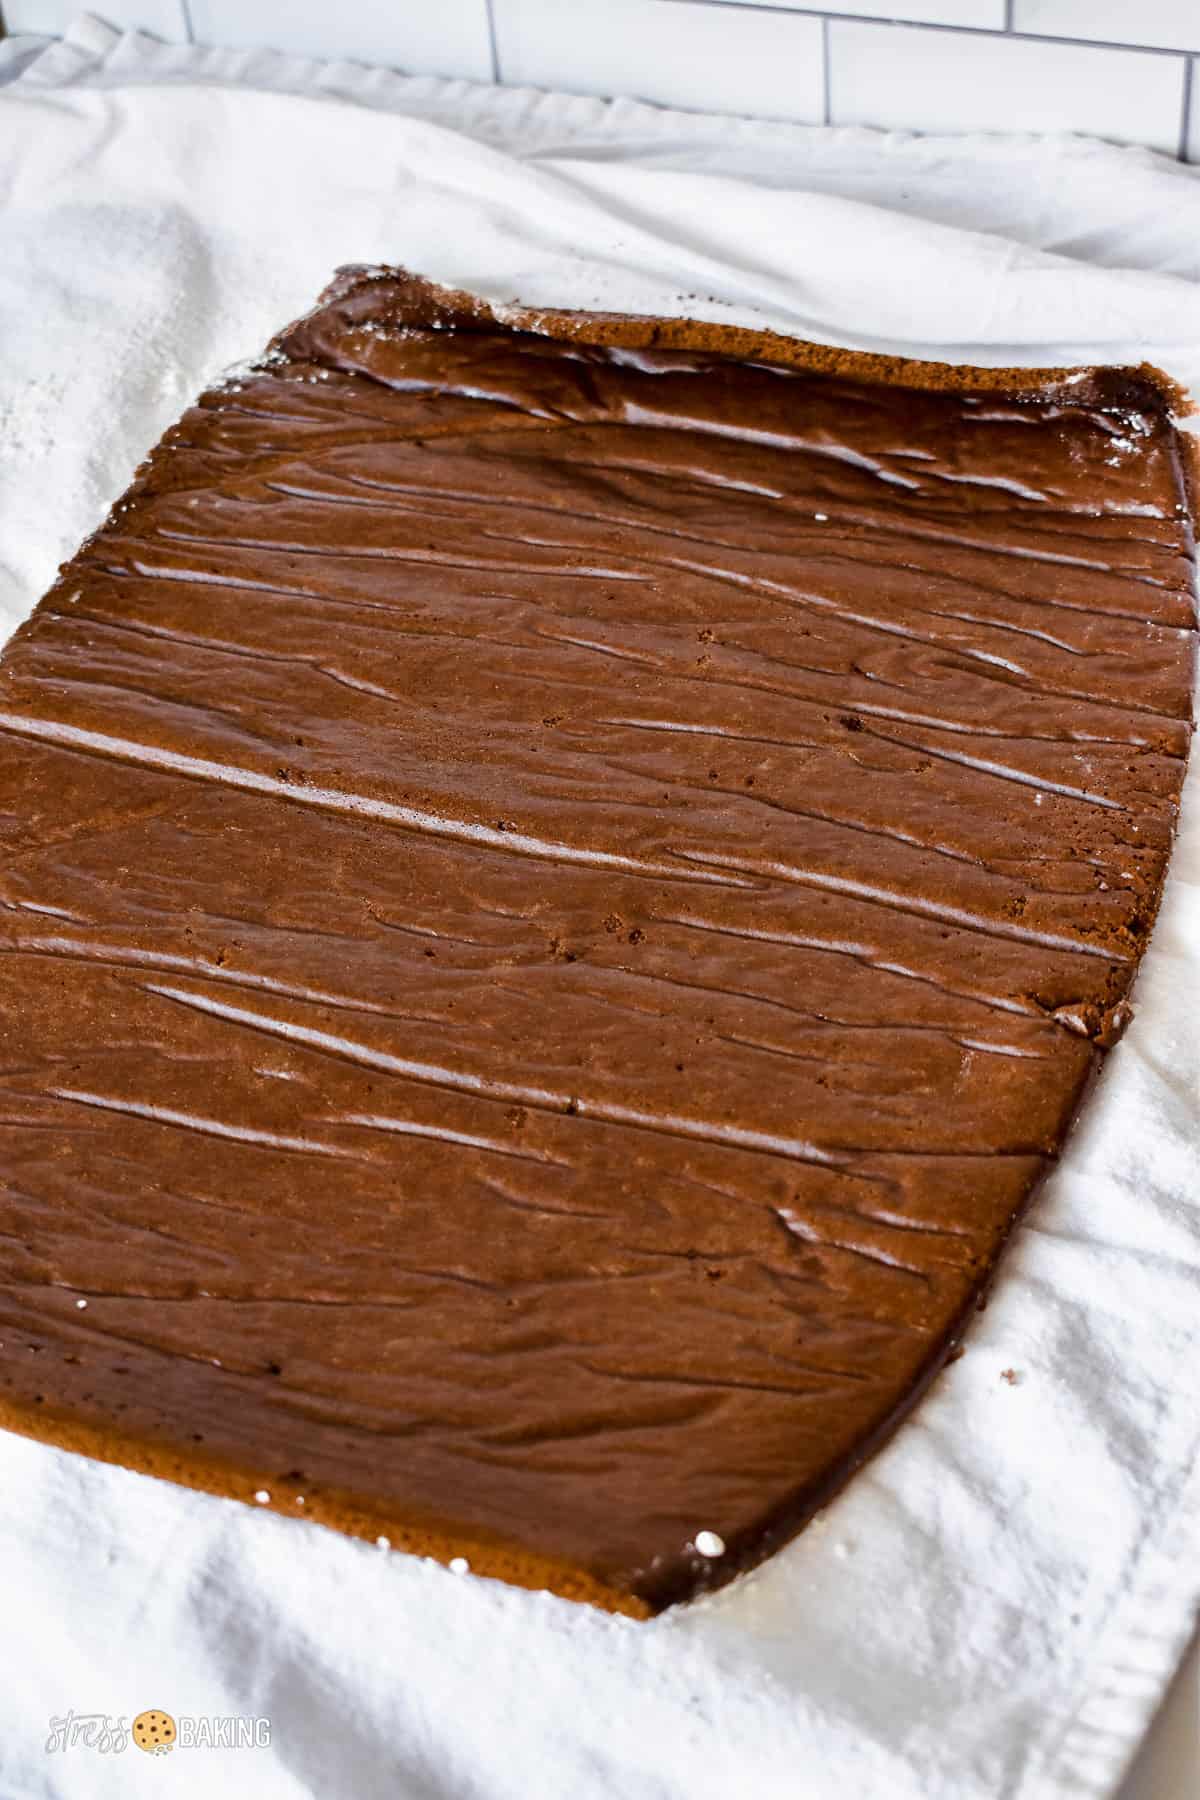 A cooled, thin layer of chocolate cake unrolled on a white kitchen towel